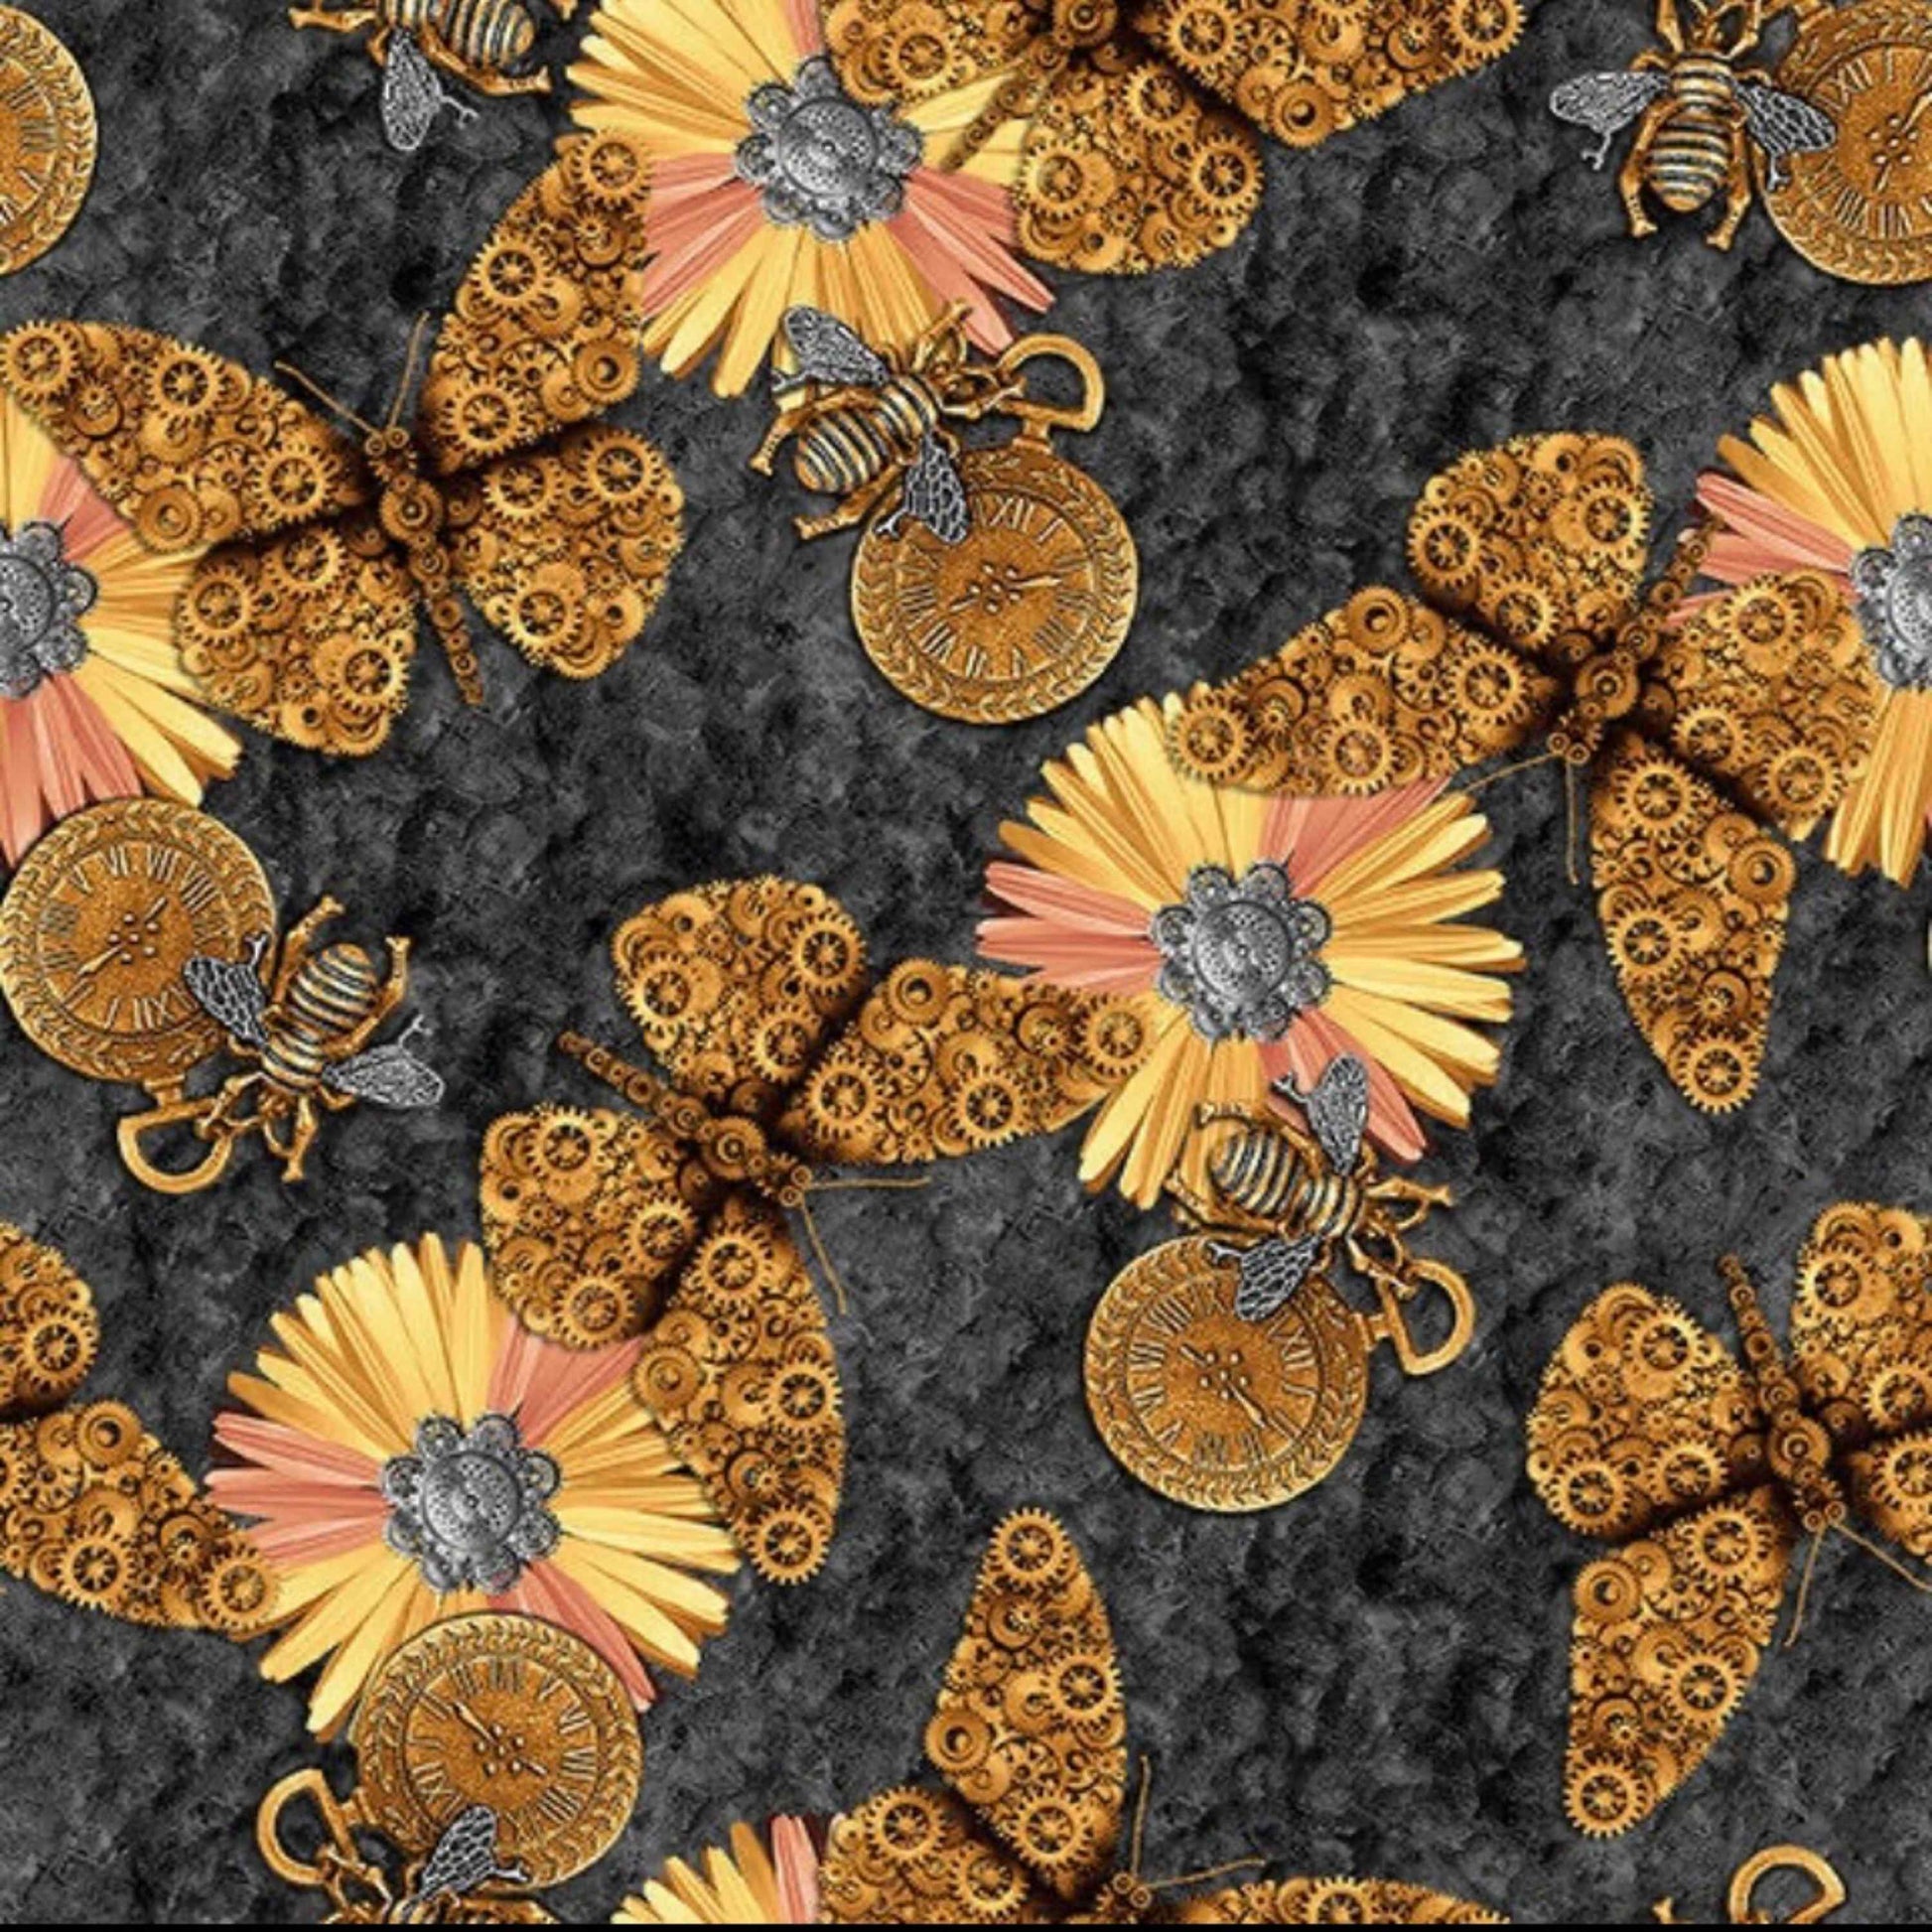 Alternative Age Butterflies and Bees Steampunk Inspired Cotton Fabric